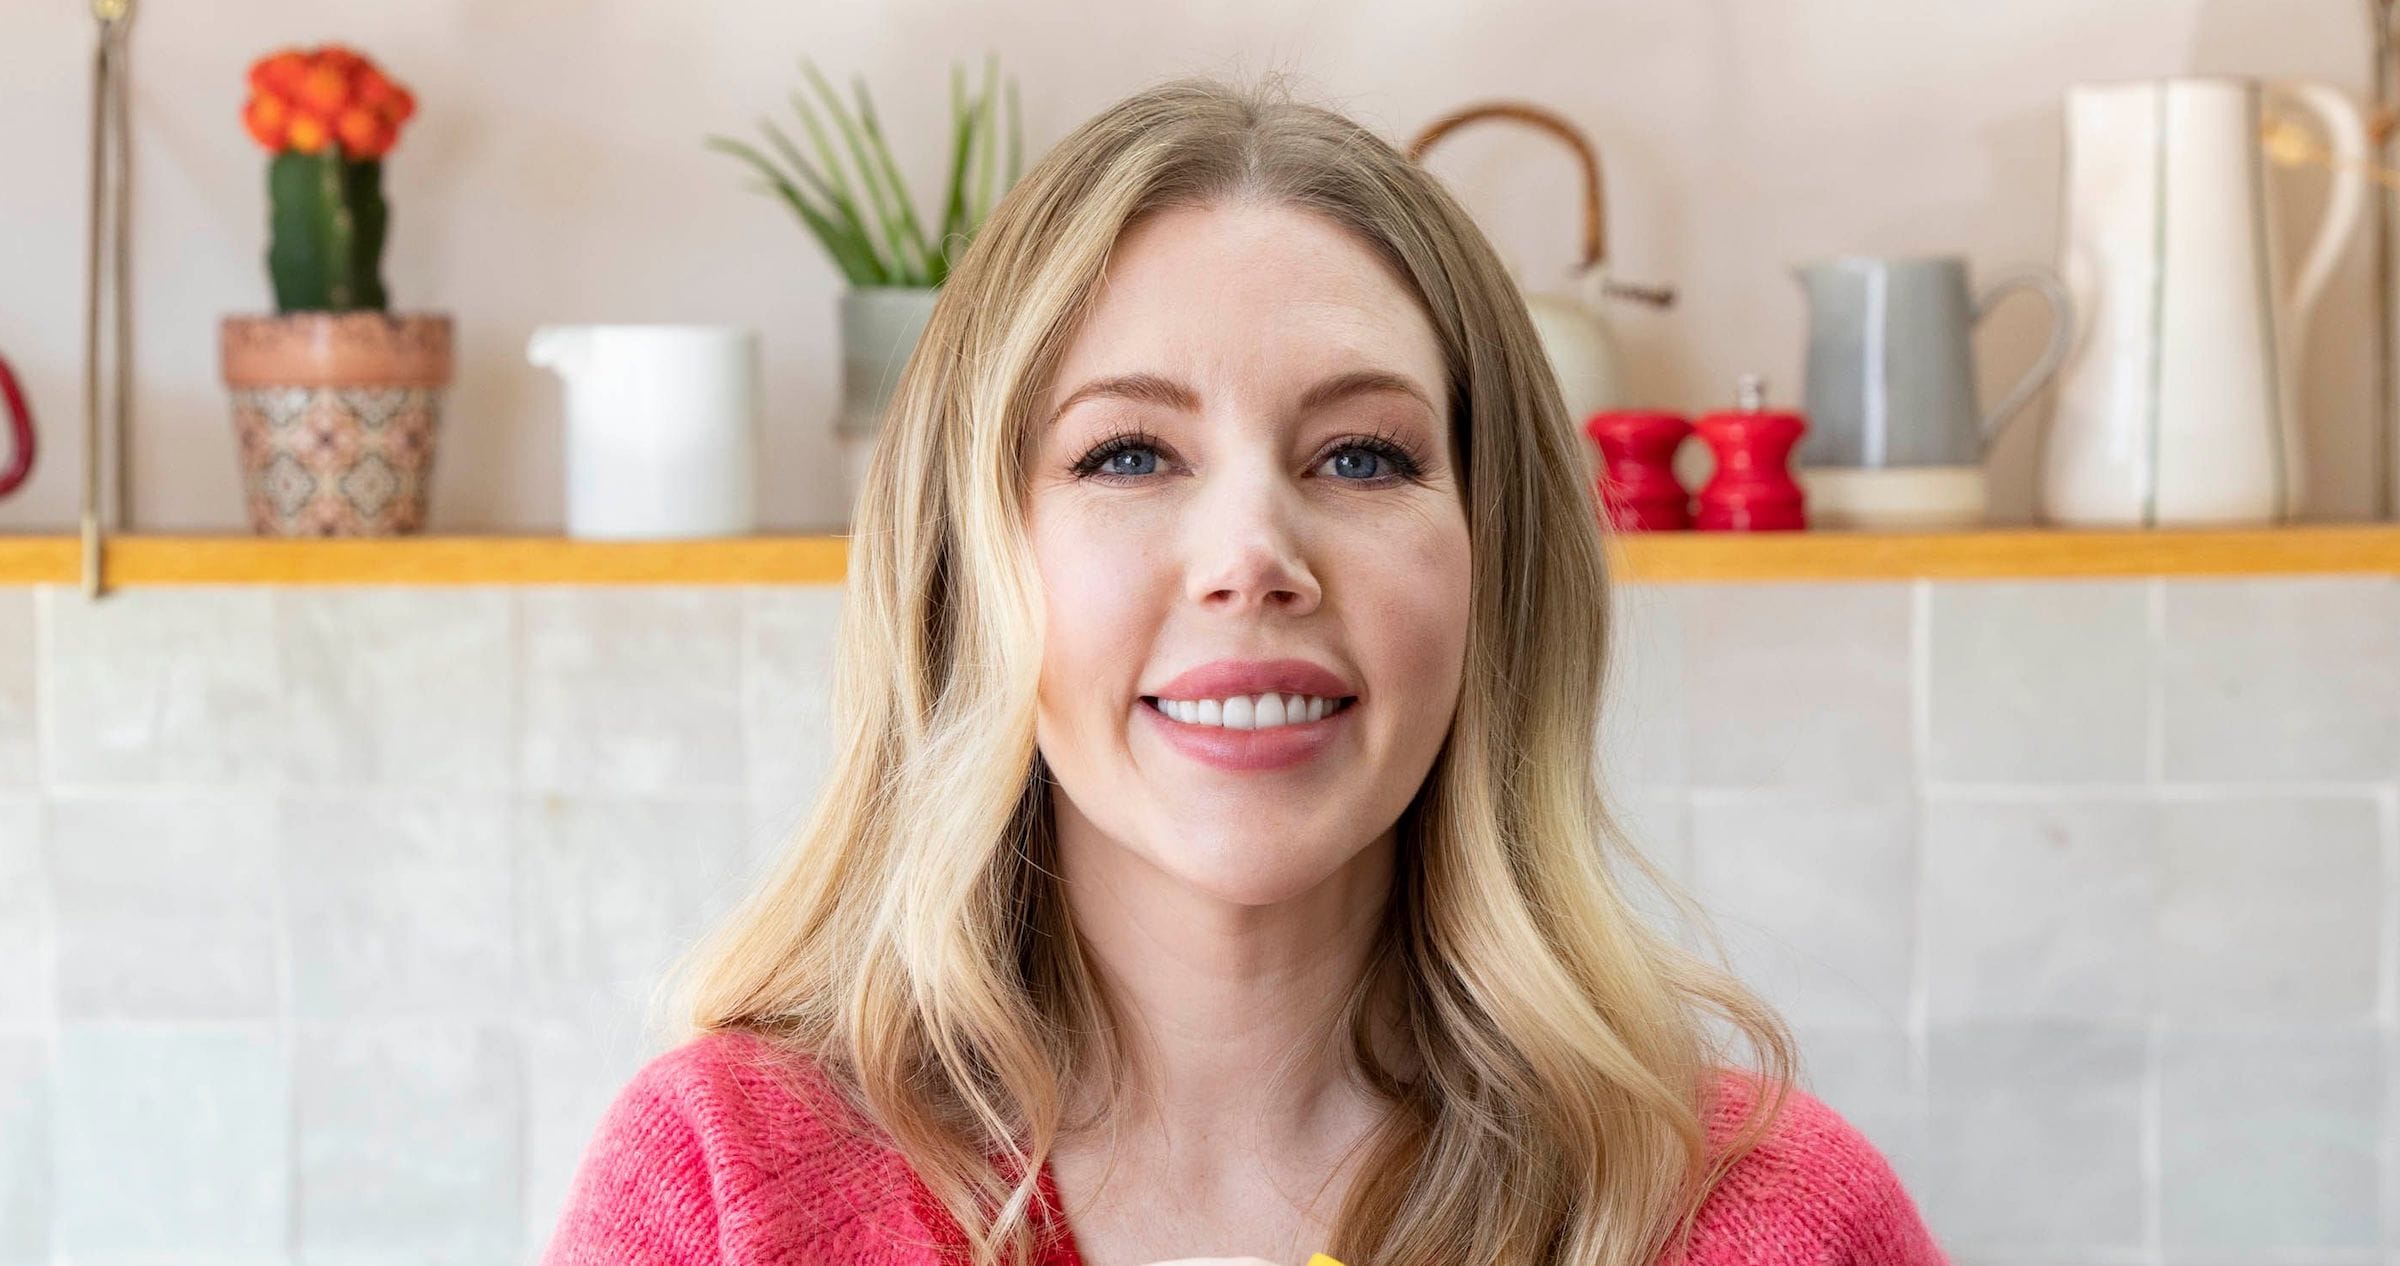 Katherine Ryan On Being Accidentally Healthy And Why She Doesn’t ‘Do’ Exercise